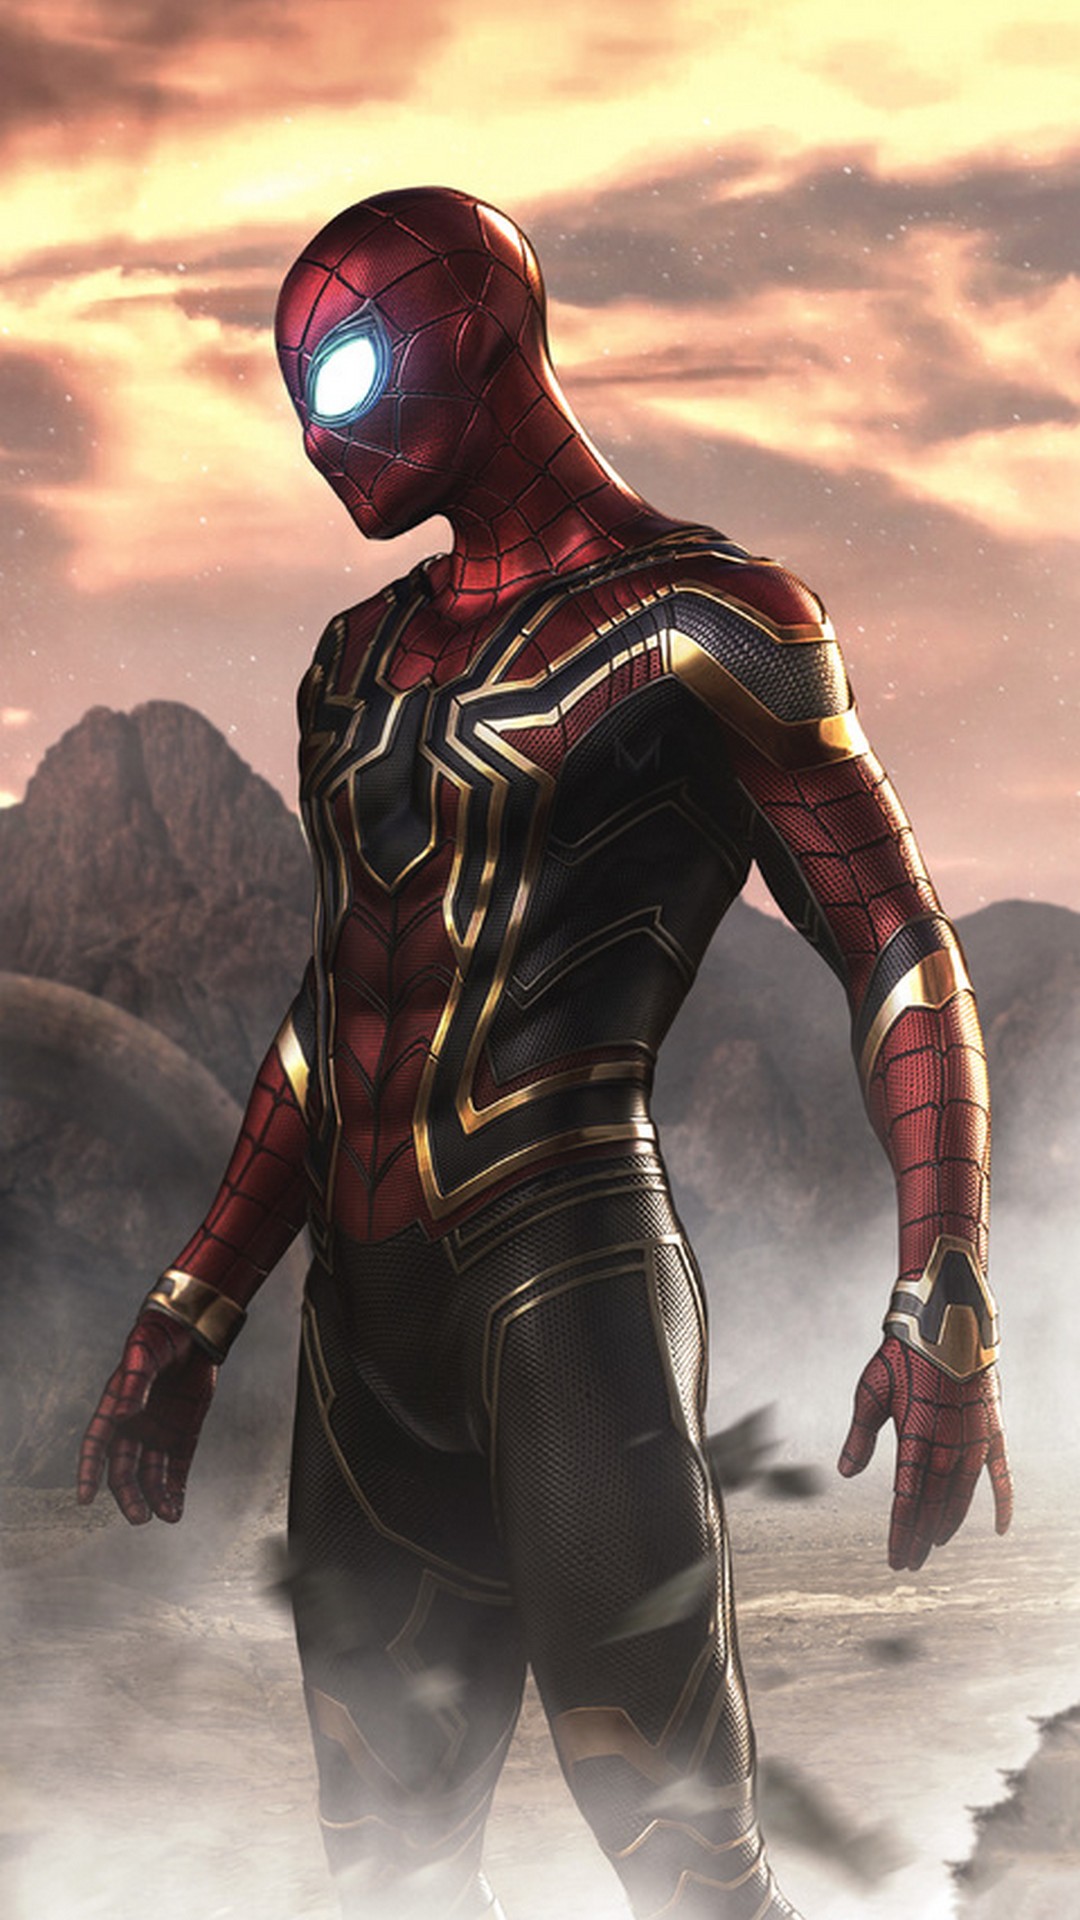 Spider-Man 2019 Far From Home Phone Wallpaper | 2021 Phone ...